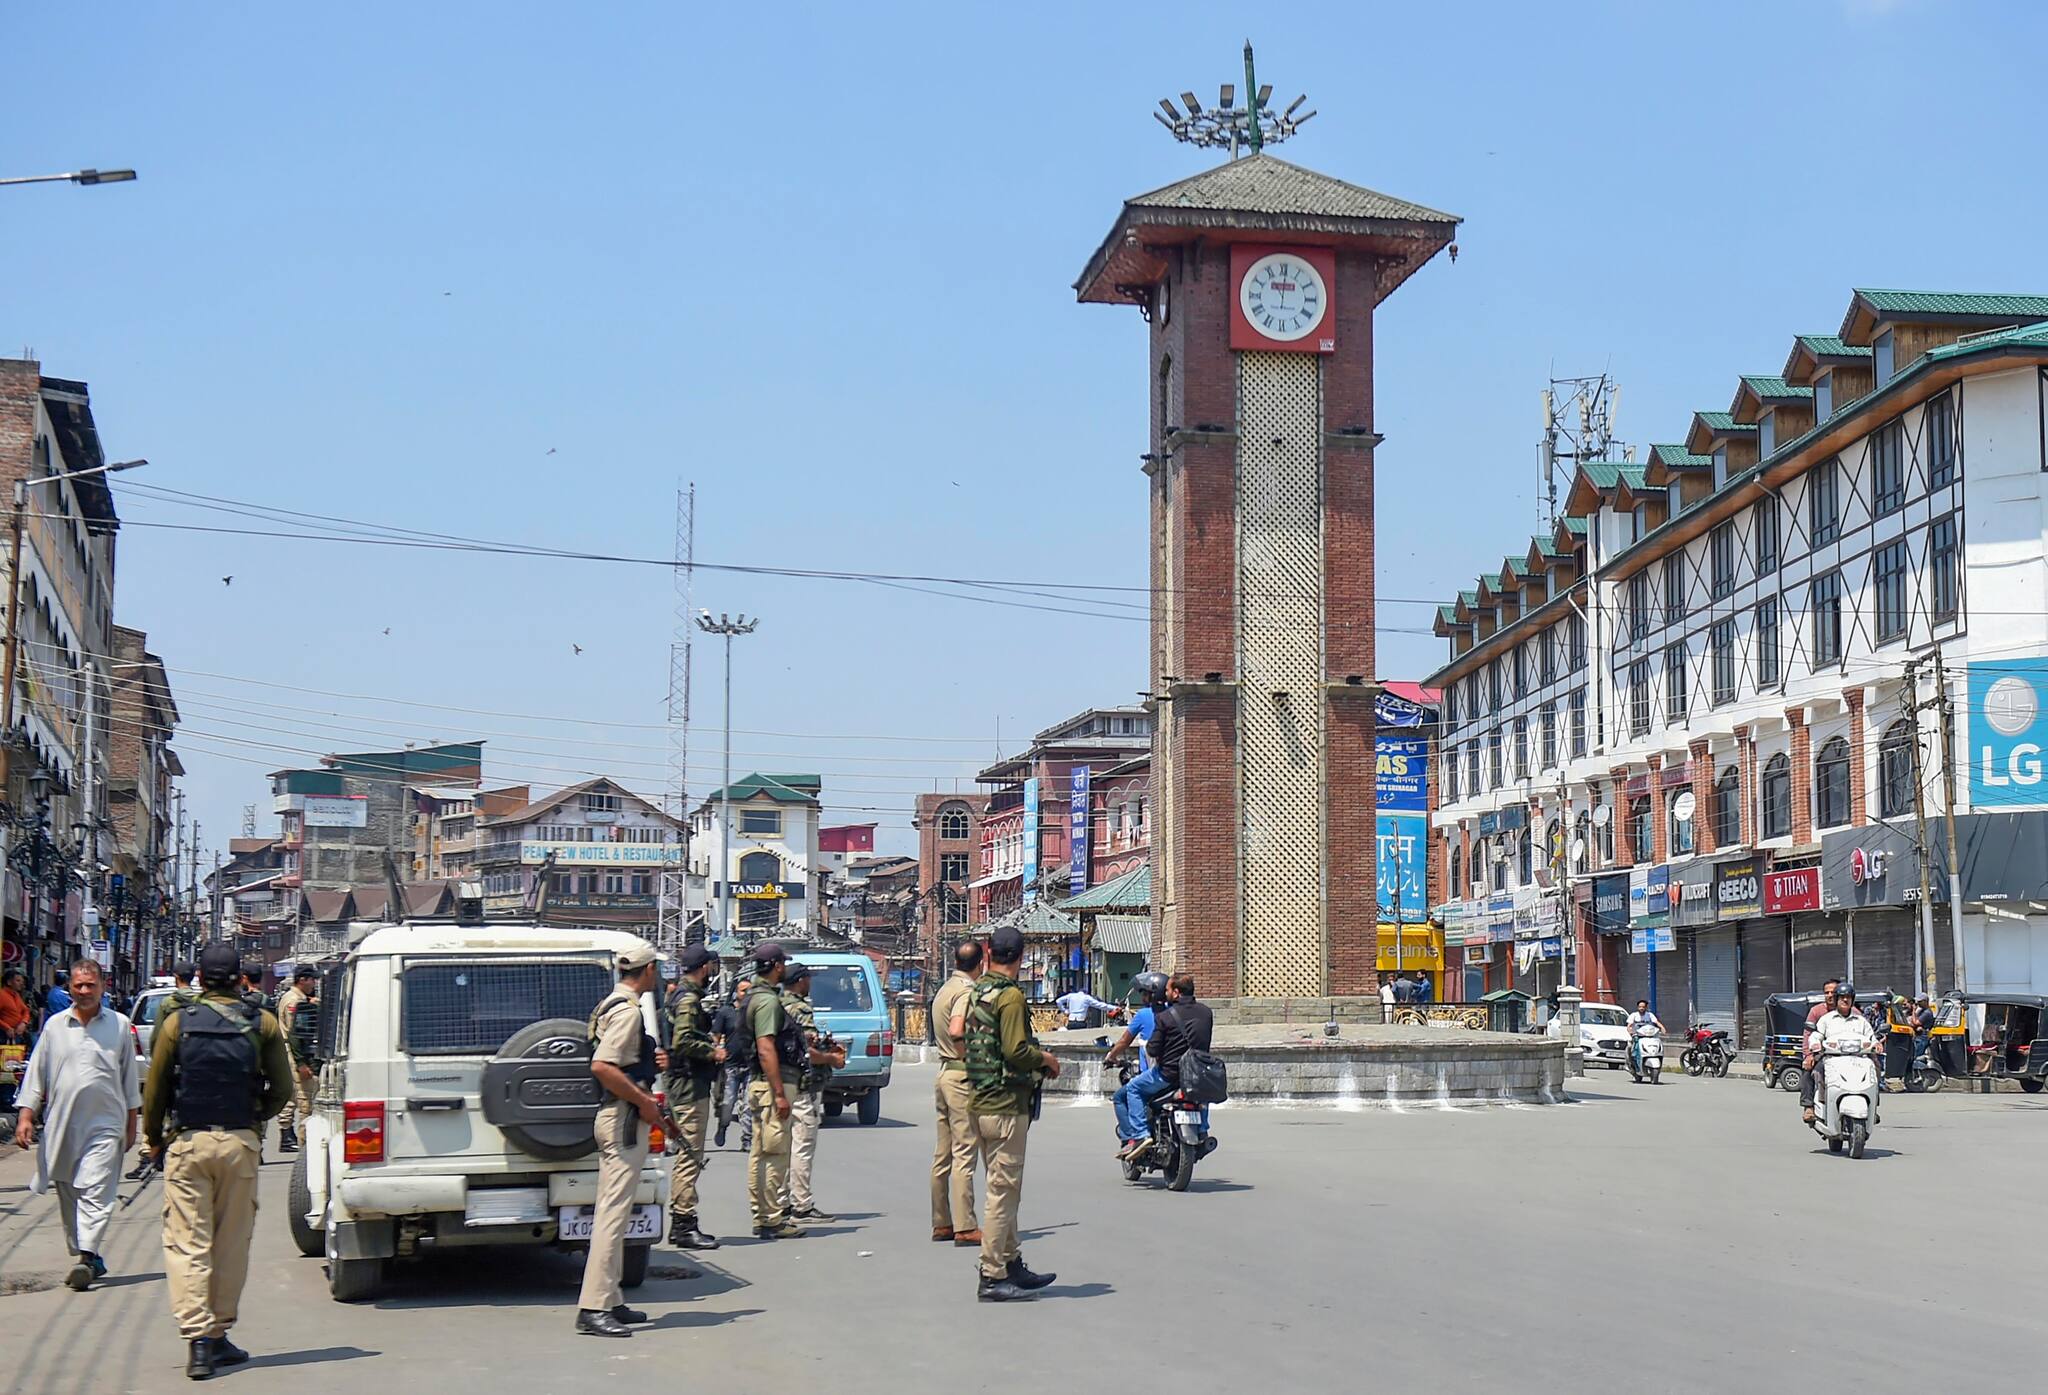 Security personnel on duty during a strike over controversial remarks by two now-suspended BJP leaders about the Prophet Muhammad, in Srinagar on Friday June 10 (Image: PTI)